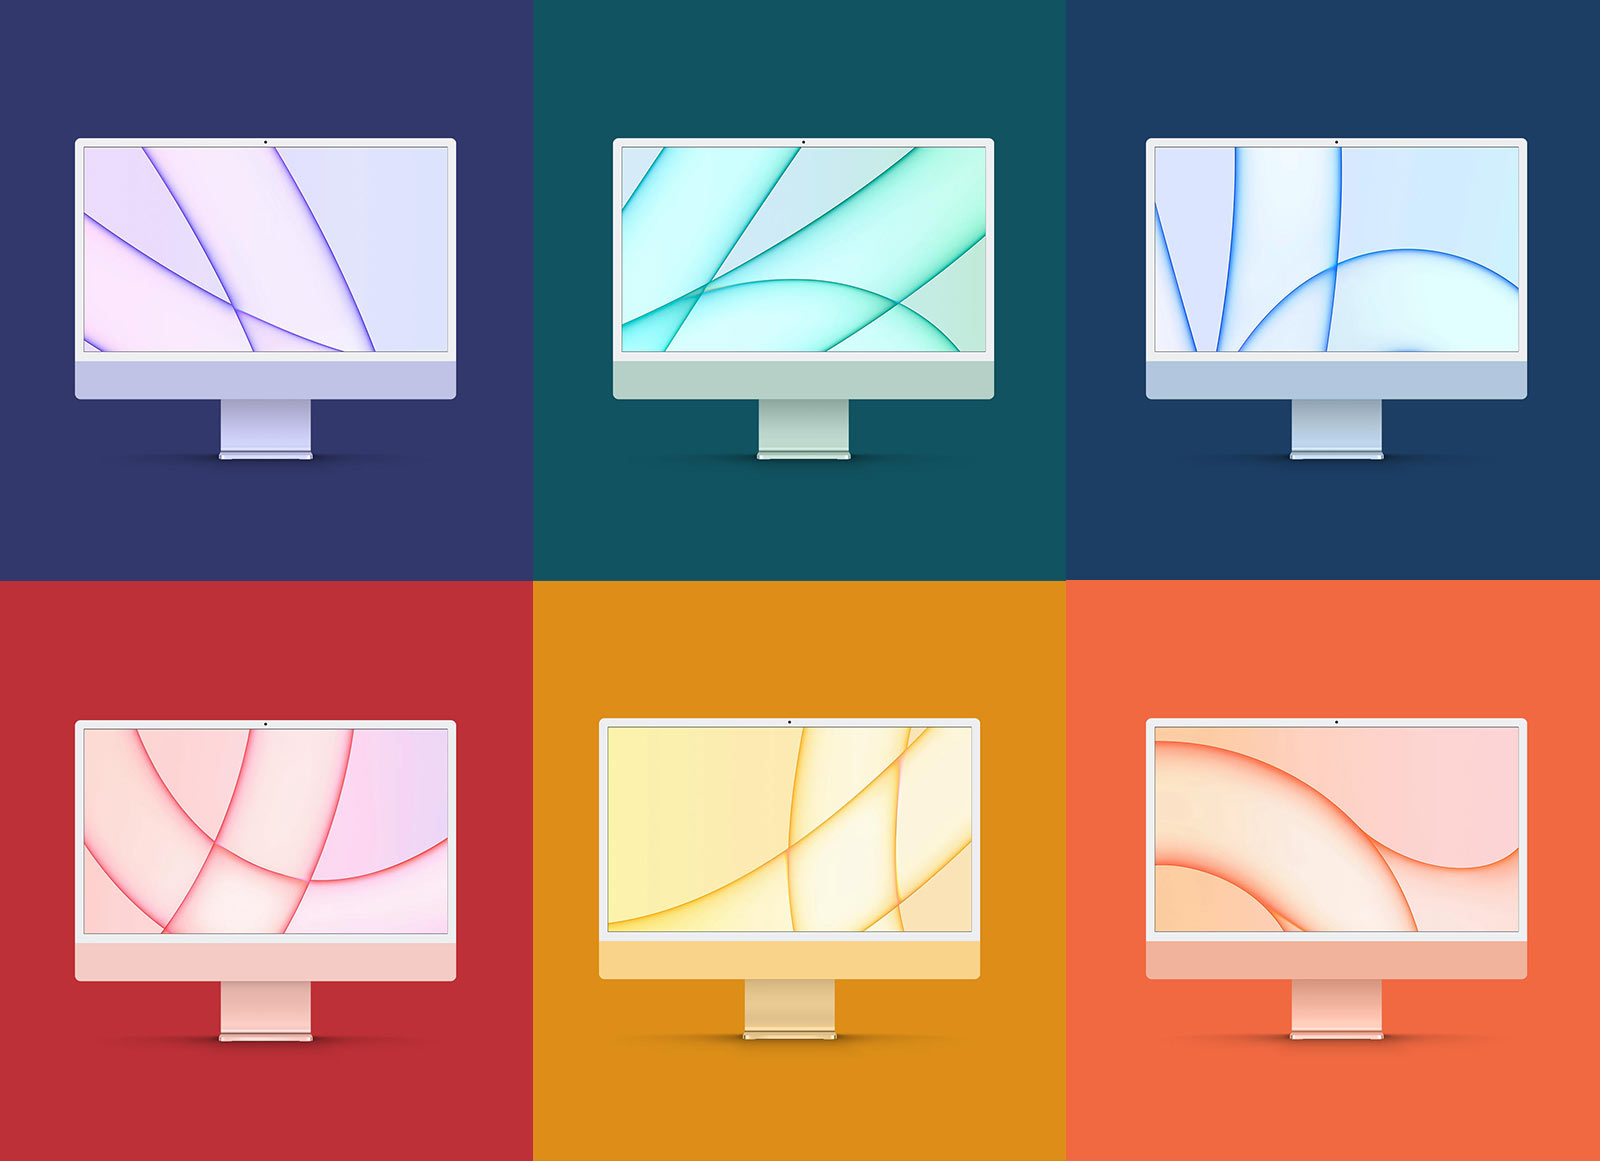 Free-iMac-24-Inches-2021-Mockup-PSD-All-Colors